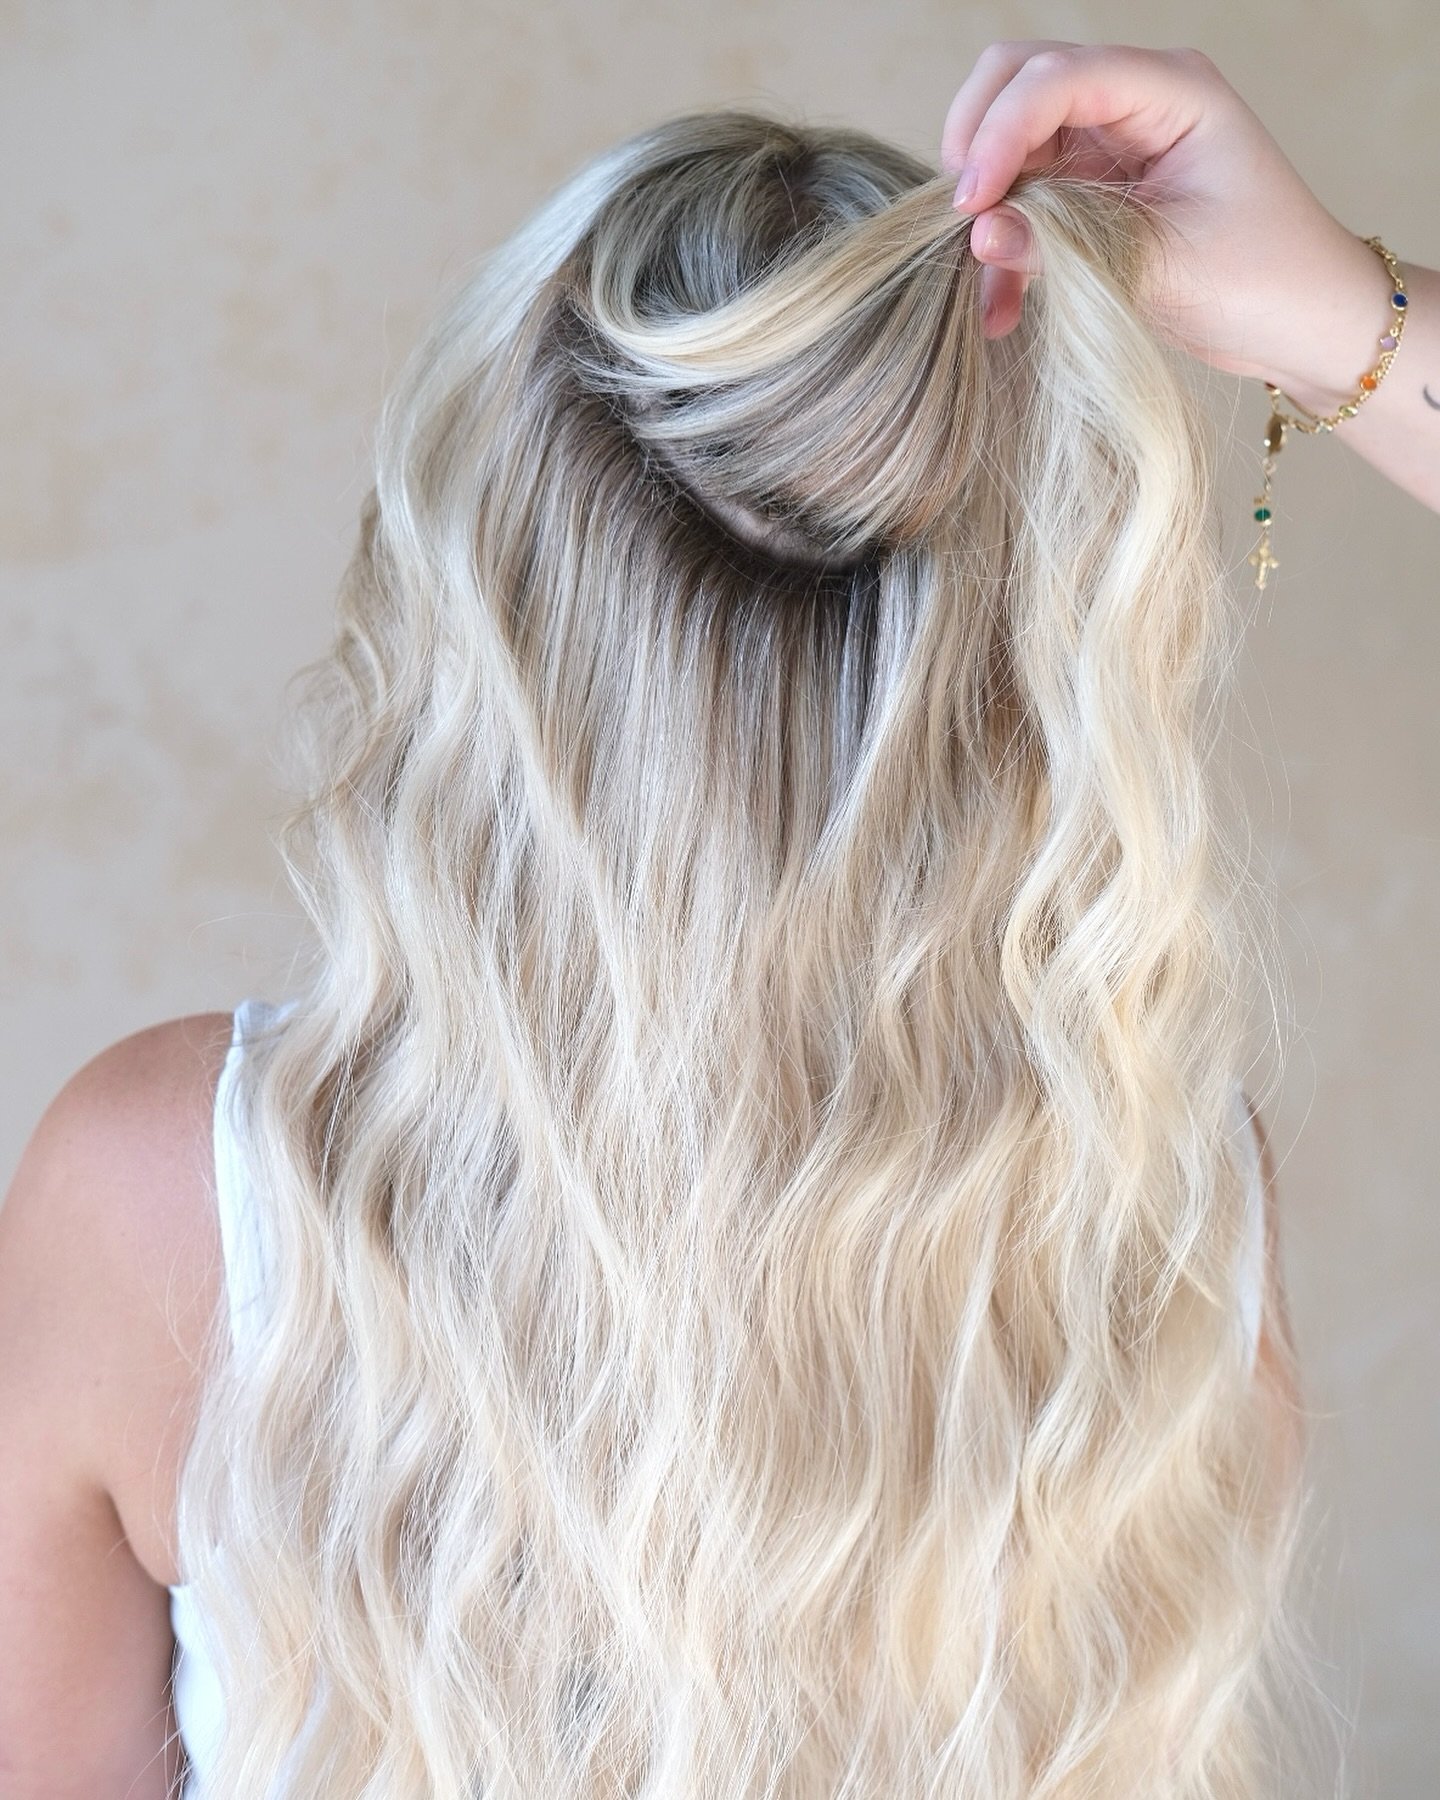 Want extensions that just look like your hair, but better? This is what you get when you come to a specialist. 
There is such attention to detail needed when getting something like extensions, you should see someone who specializes in them and that i